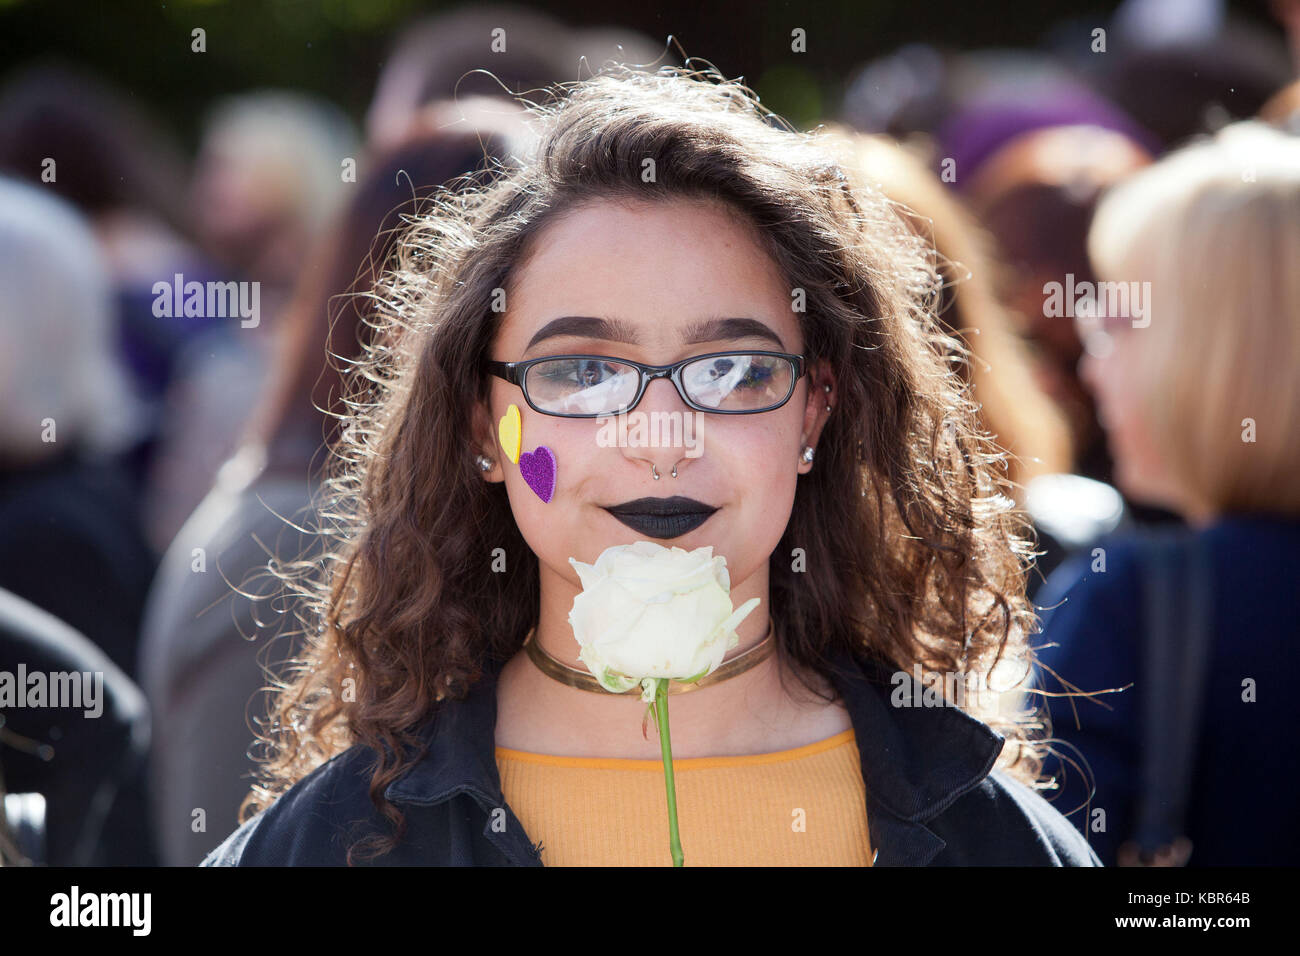 Jamilah Curran from Athboy Co Meath at The March for Choice in Dublin, a demonstration demanding change to Ireland's strict abortion laws. Stock Photo